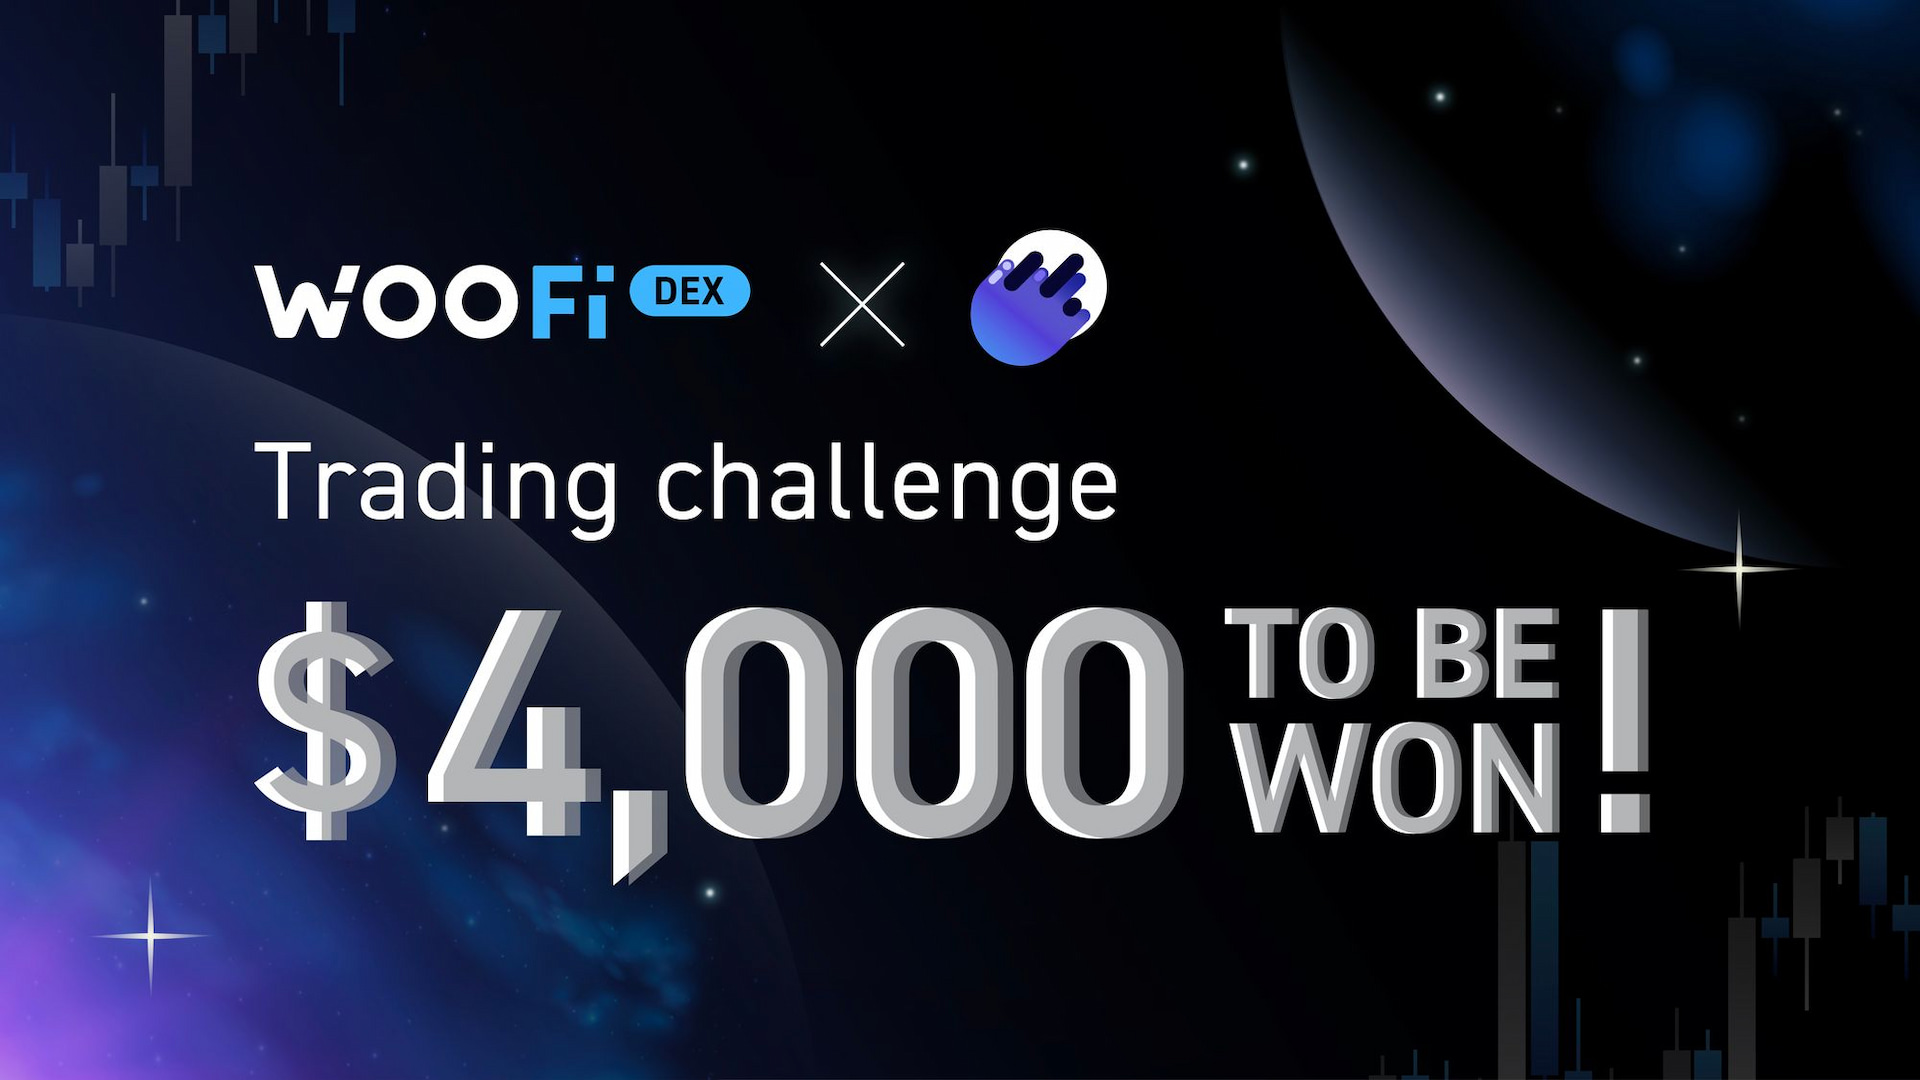 WOO Network launches a WOOFi DEX trading challenge